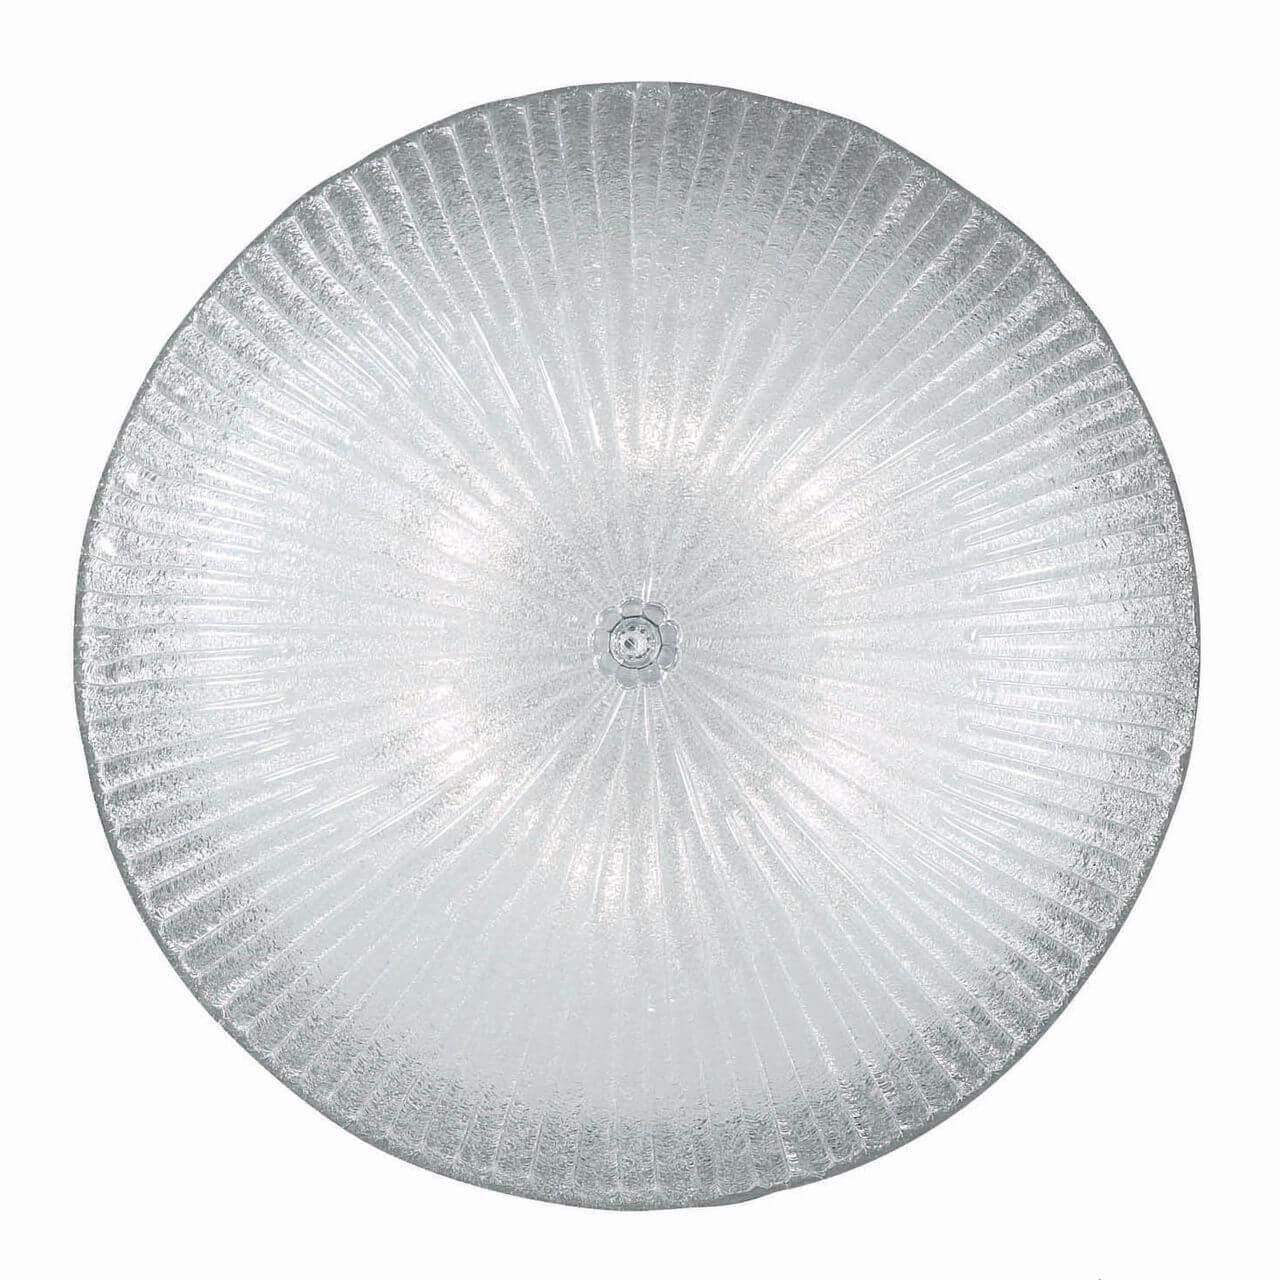   Ideal Lux Shell PL6 Trasparente 008622